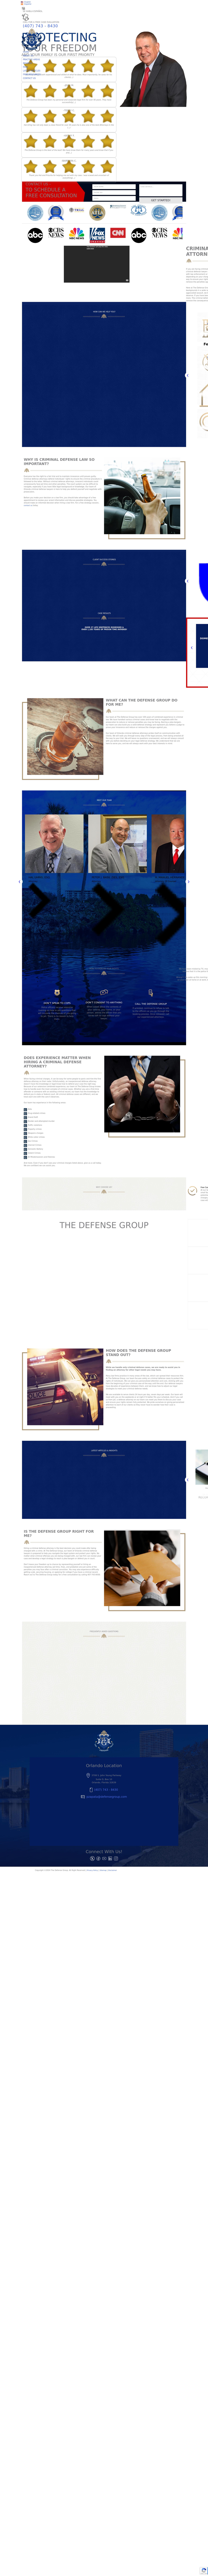 The Defense Group - Maitland FL Lawyers